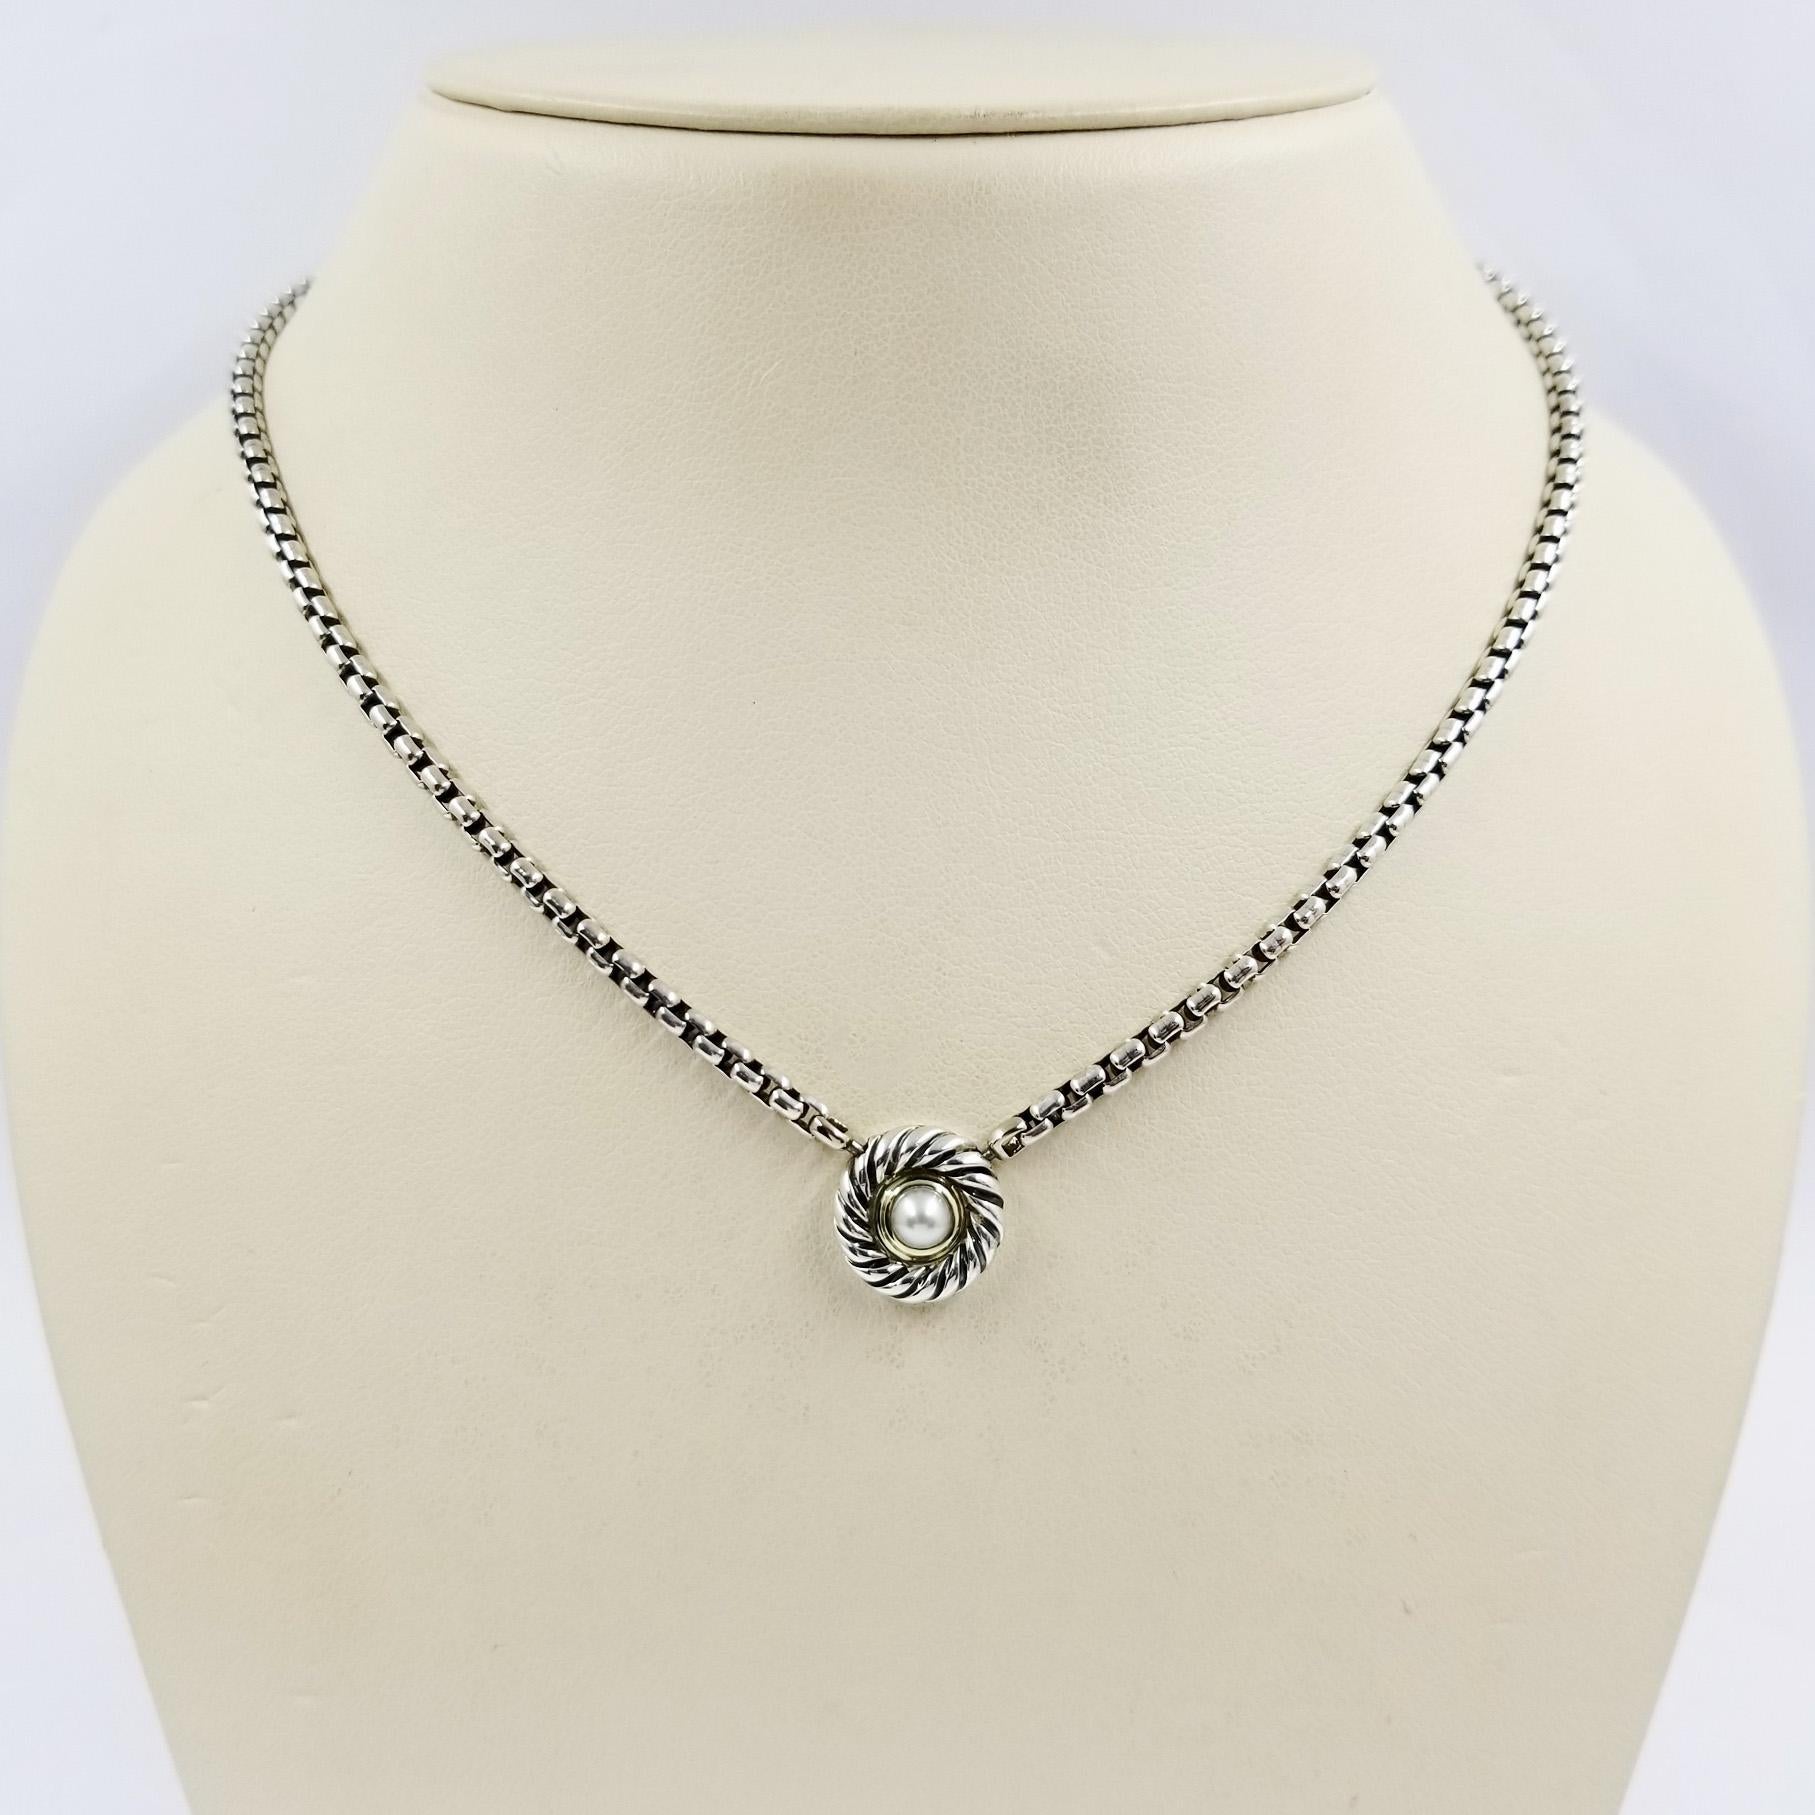 Sterling silver and 14 karat yellow gold necklace from David Yurman. The 16.5 inch rounded box chain features a bezel set cultured pearl. Lobster clasp closure at back of neck. Original MSRP $525.